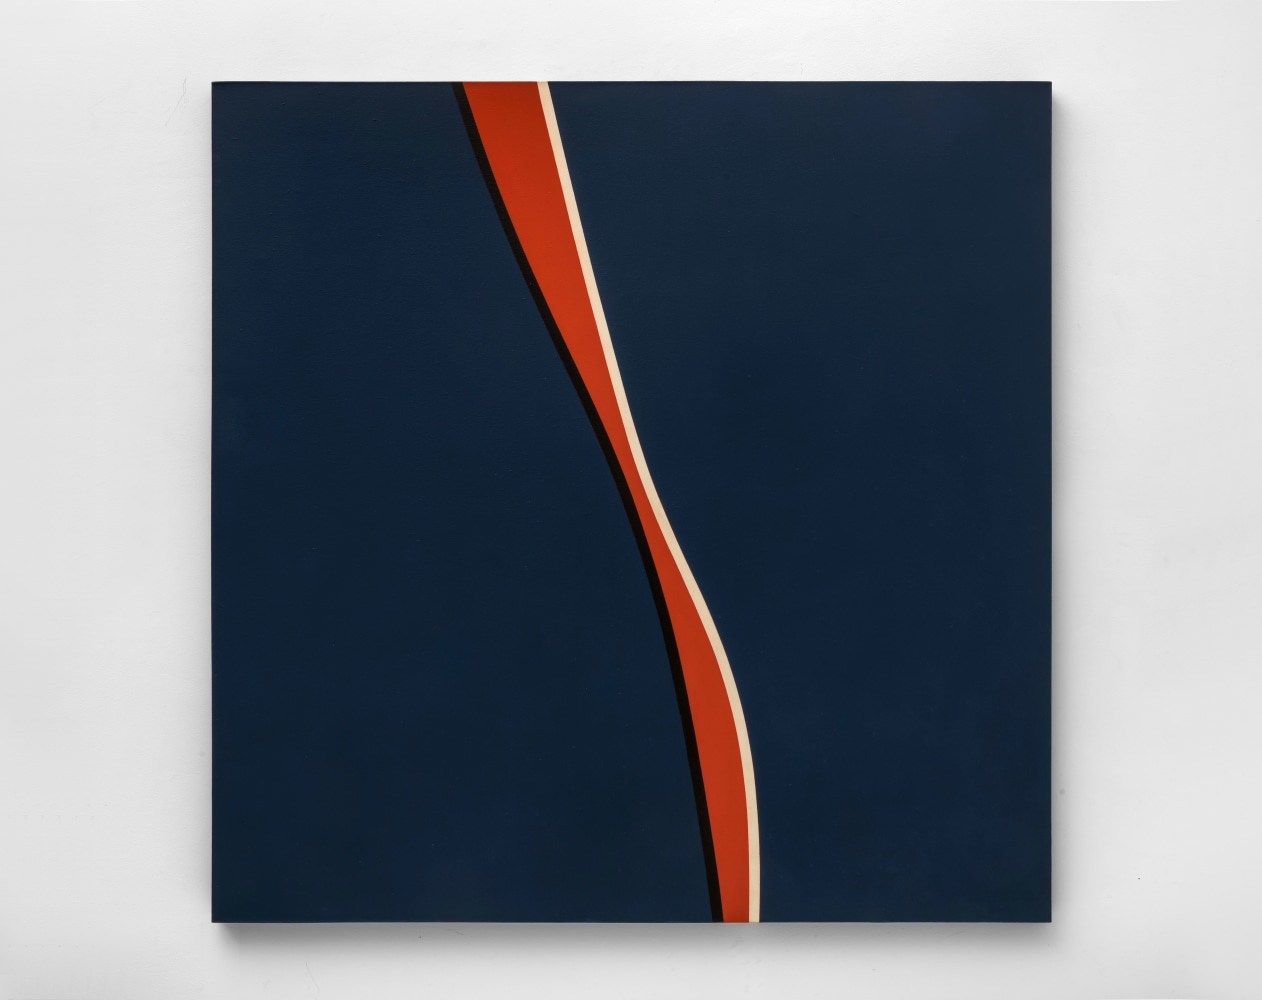 Untitled (April), 1967 oil on canvas 60 x 60 inches; 152.4 x 152.4 centimeters LSFA #11419